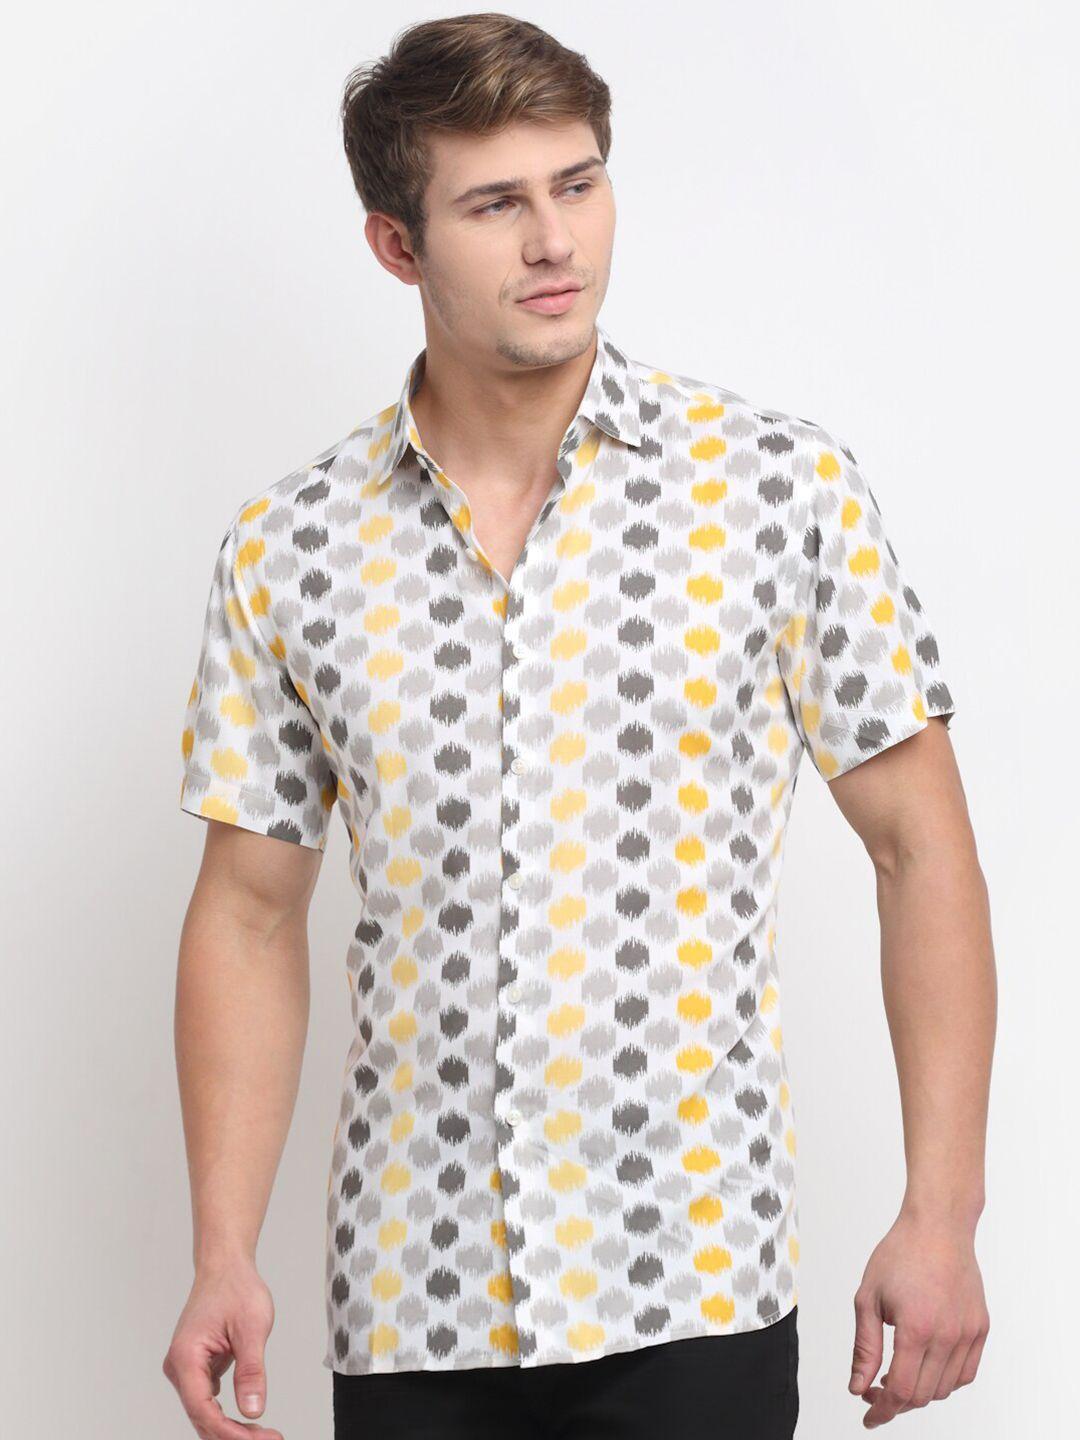 ennoble men relaxed abstract printed tailored fit cotton casual shirt